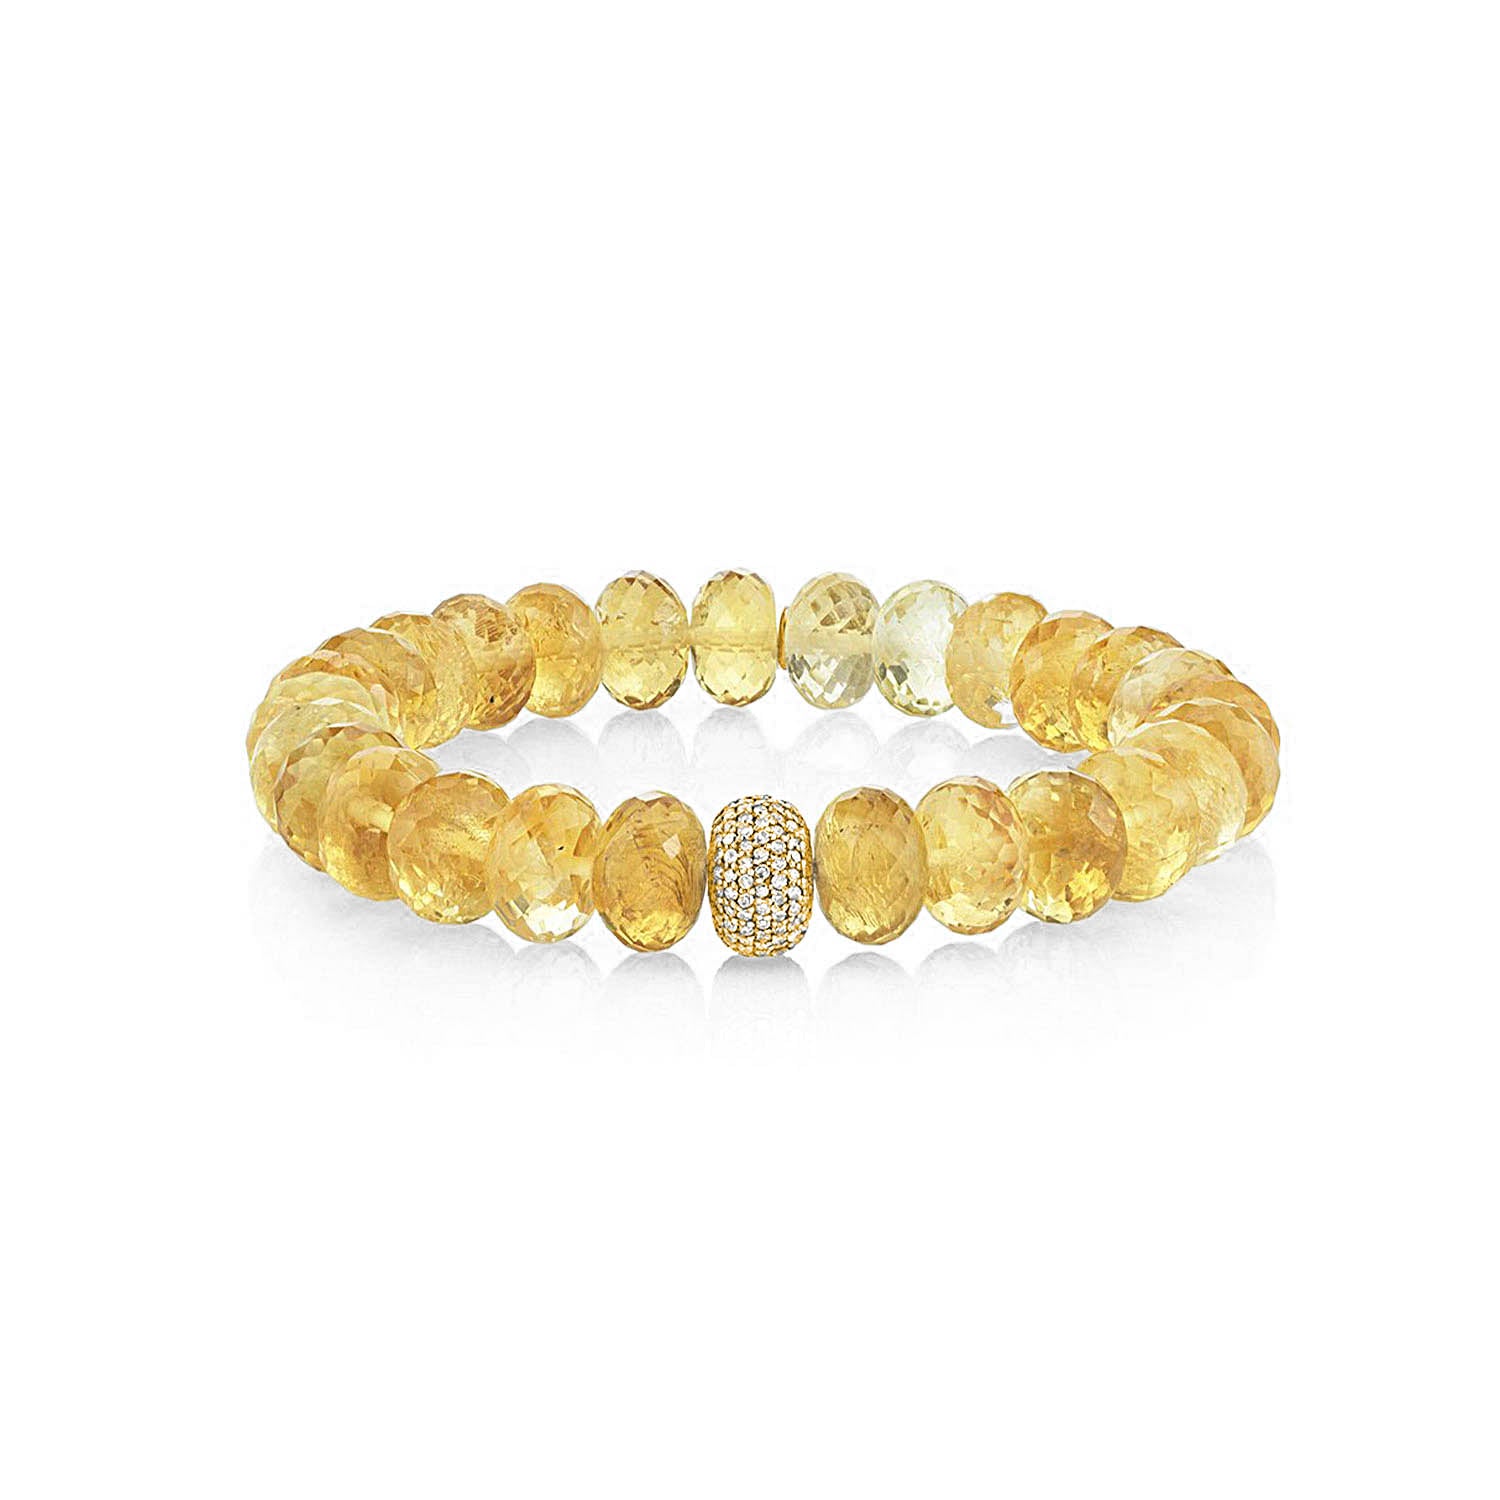 Side view  of a faceted yellow citrine bead stretch bracelet with a 14k yellow gold and diamond center rondelle.